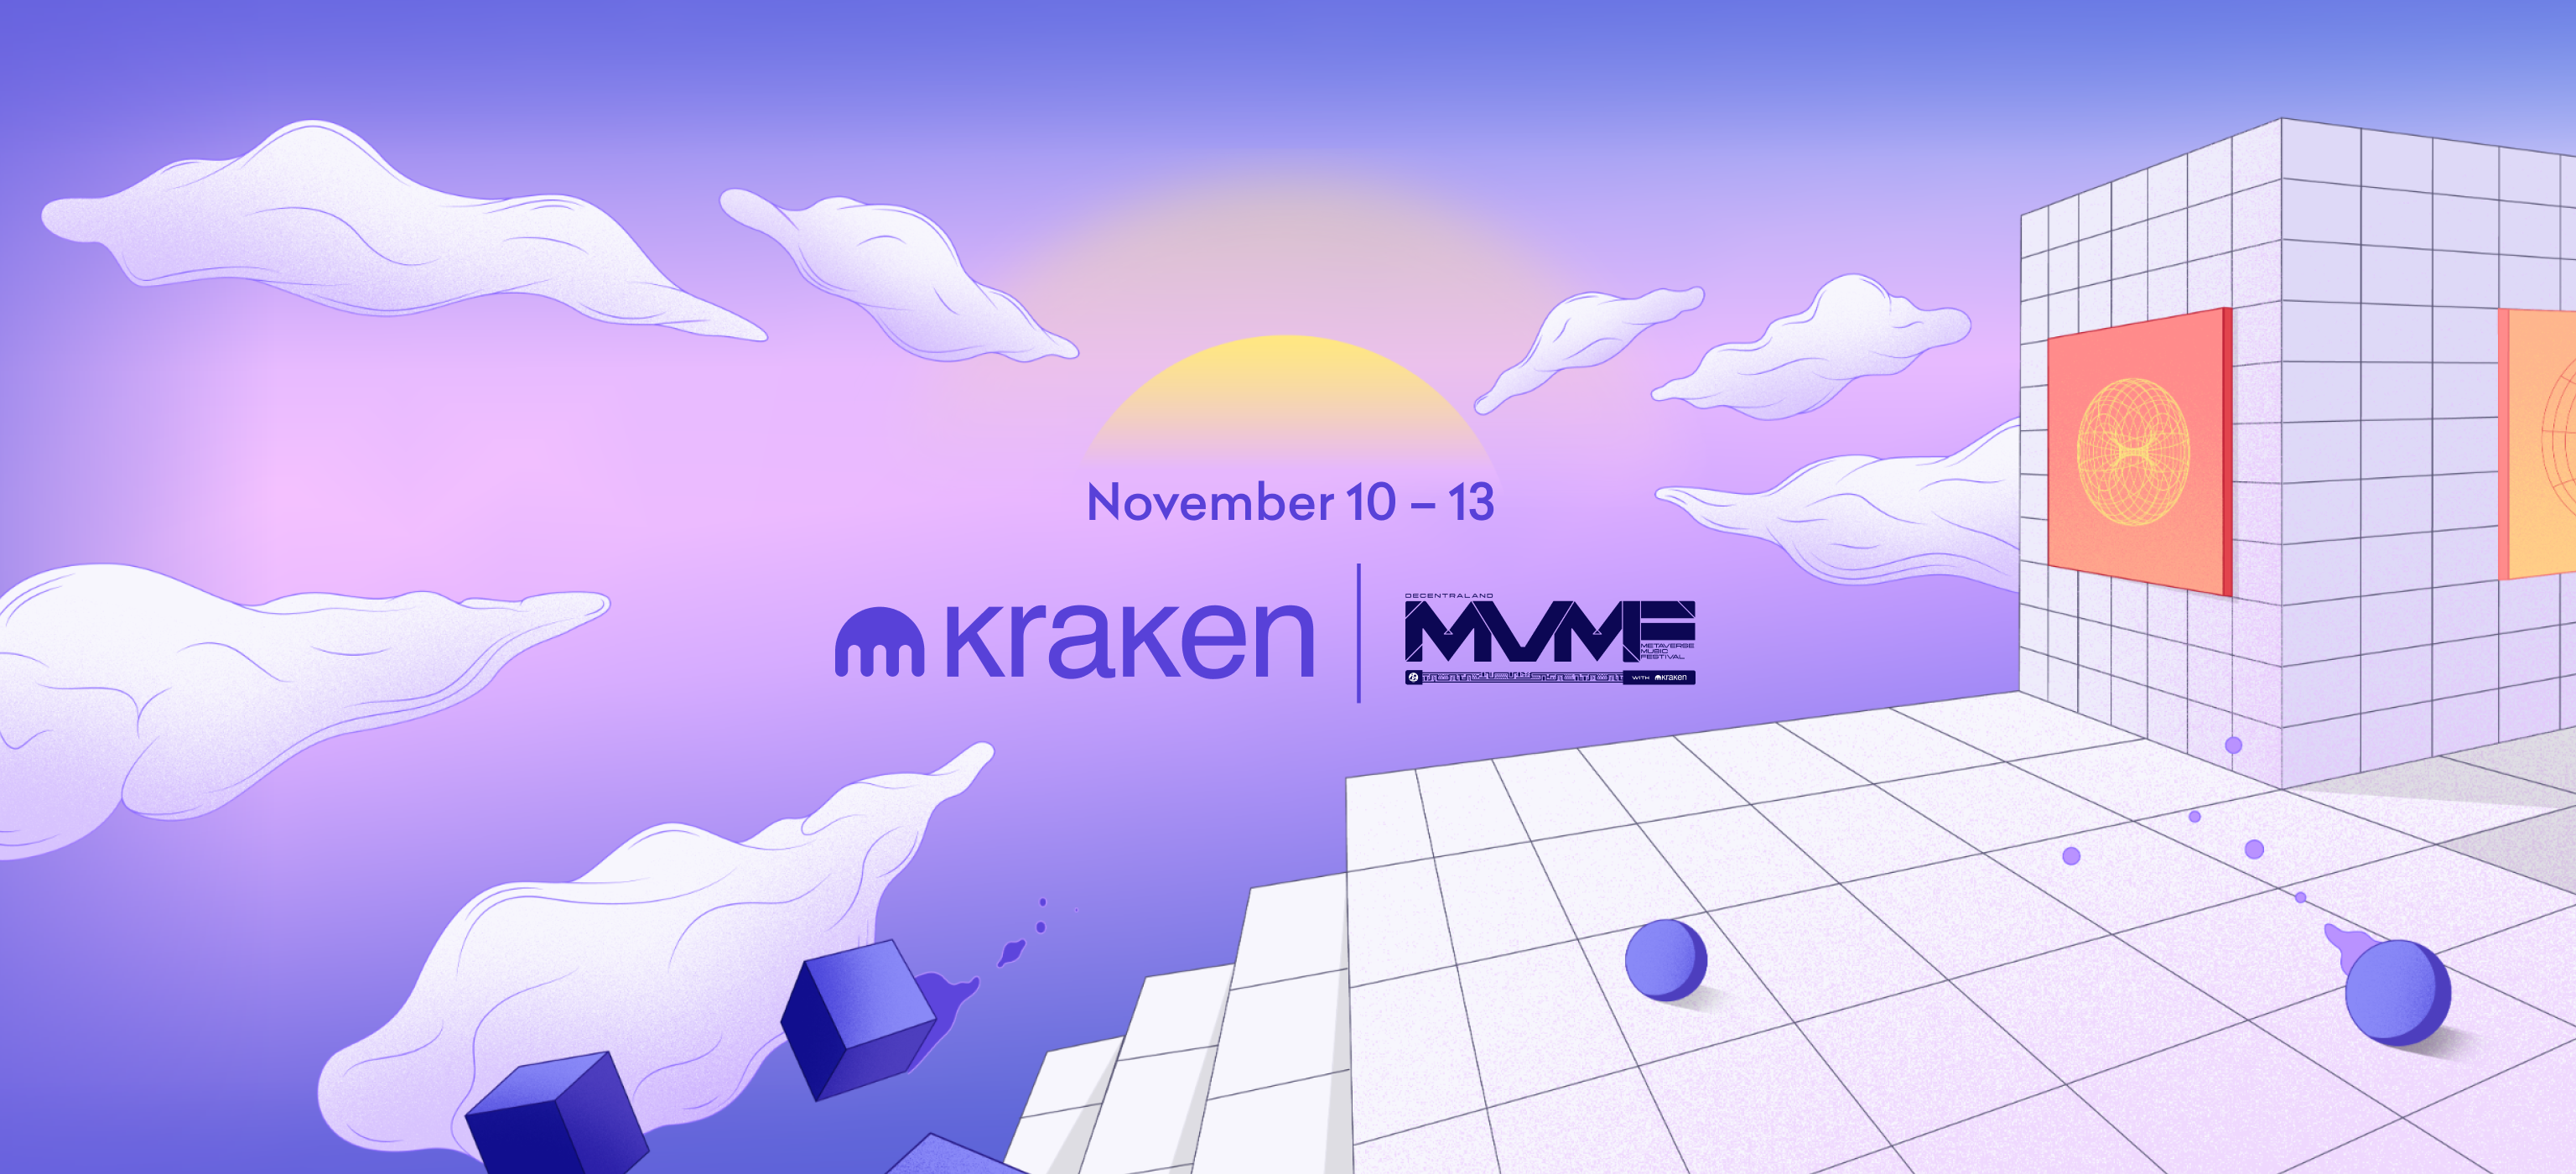 We’re about to crank it up: Kraken presents this year’s DCL Metaverse Music Festival